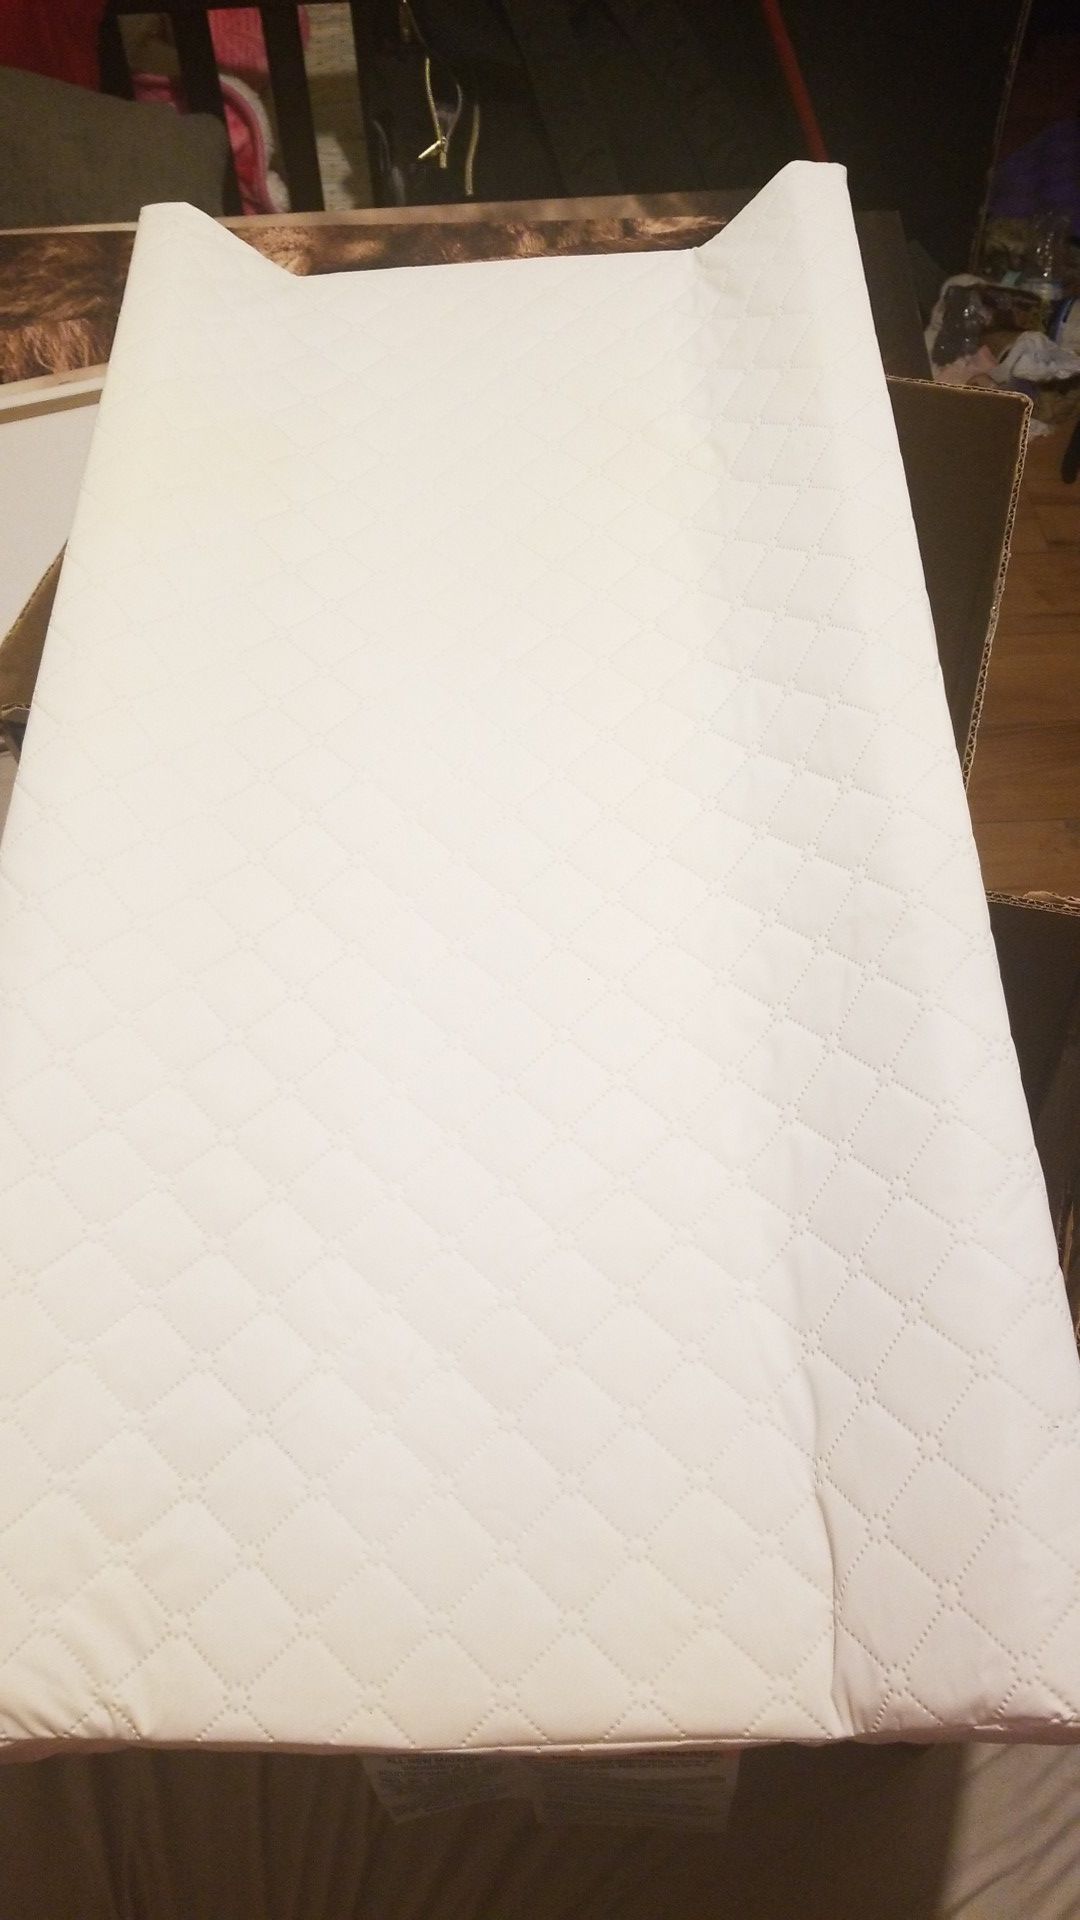 Changing pad for table